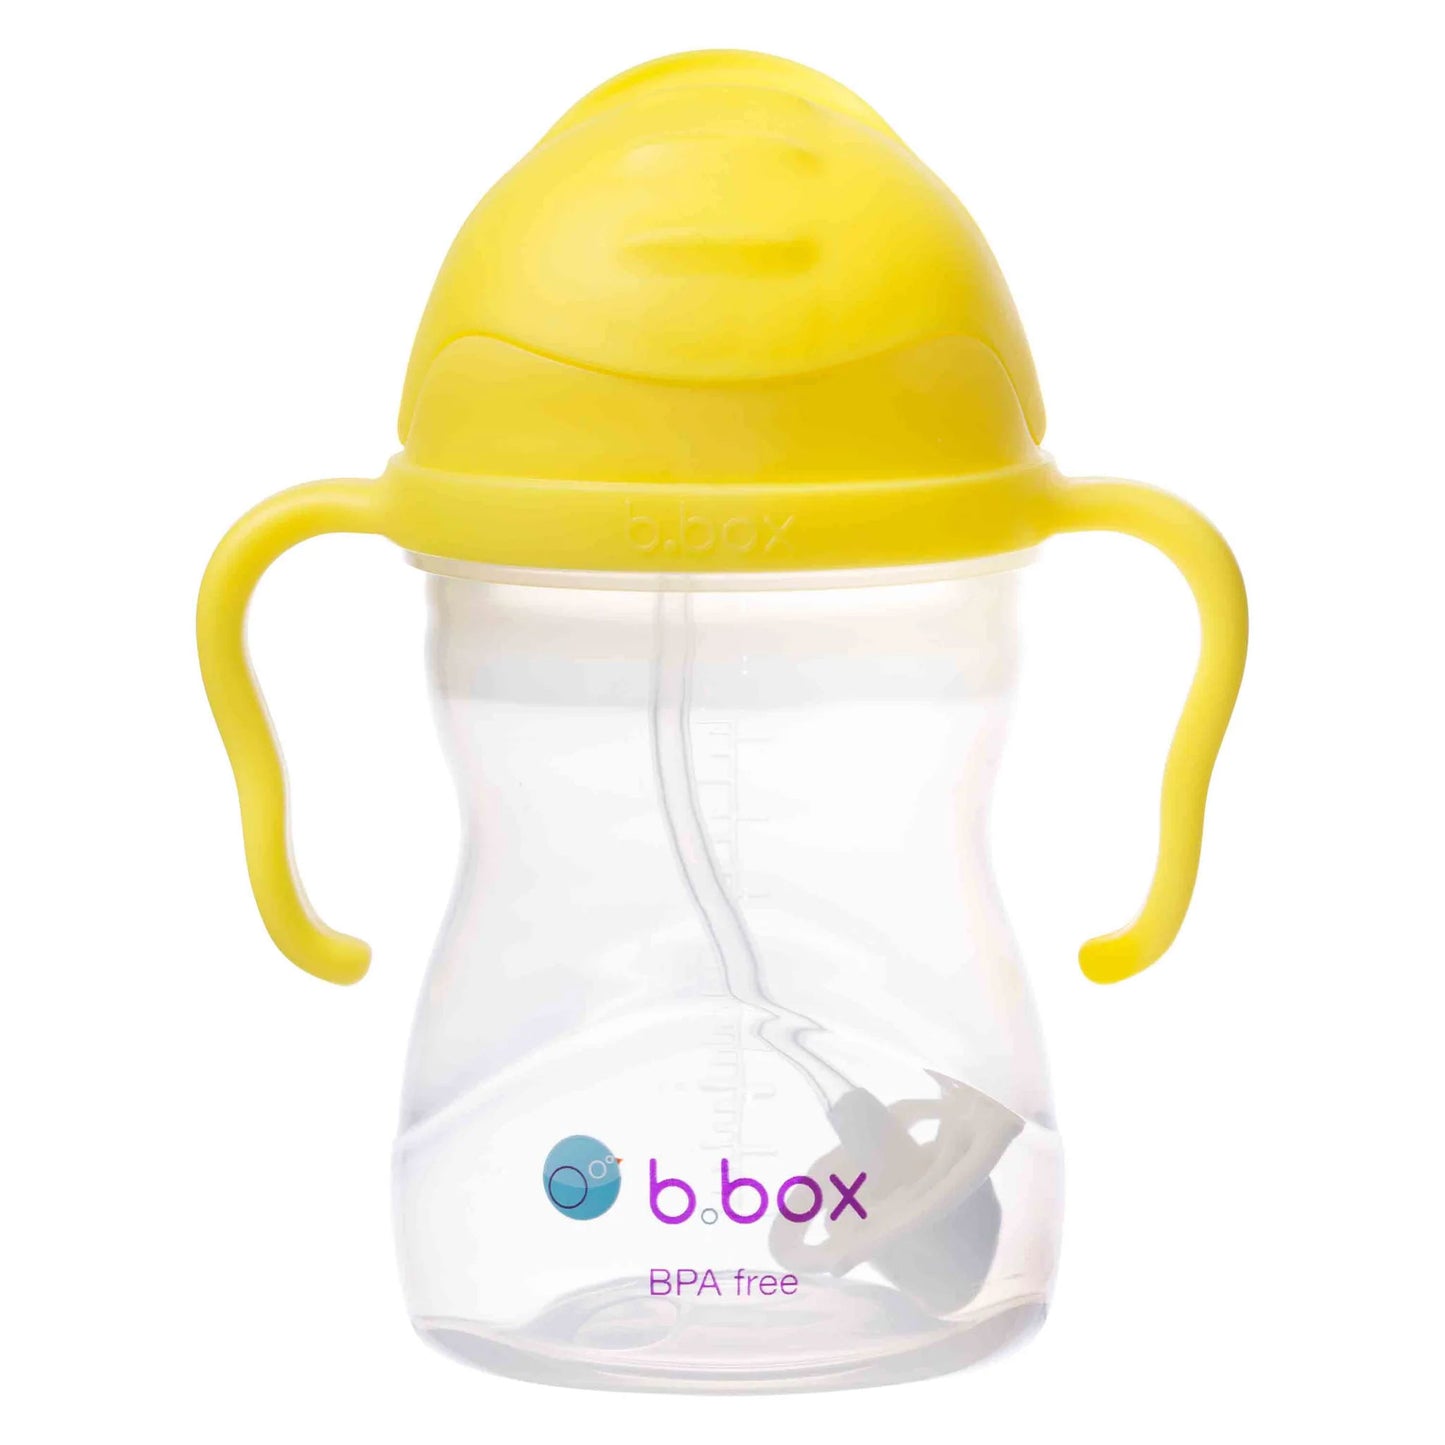 The b.box Sippy Cup is a reusable baby and toddler water bottle which comes with a weighted straw and easy grip handles. The flip top lid makes it easy to use. Drink from any angle. 